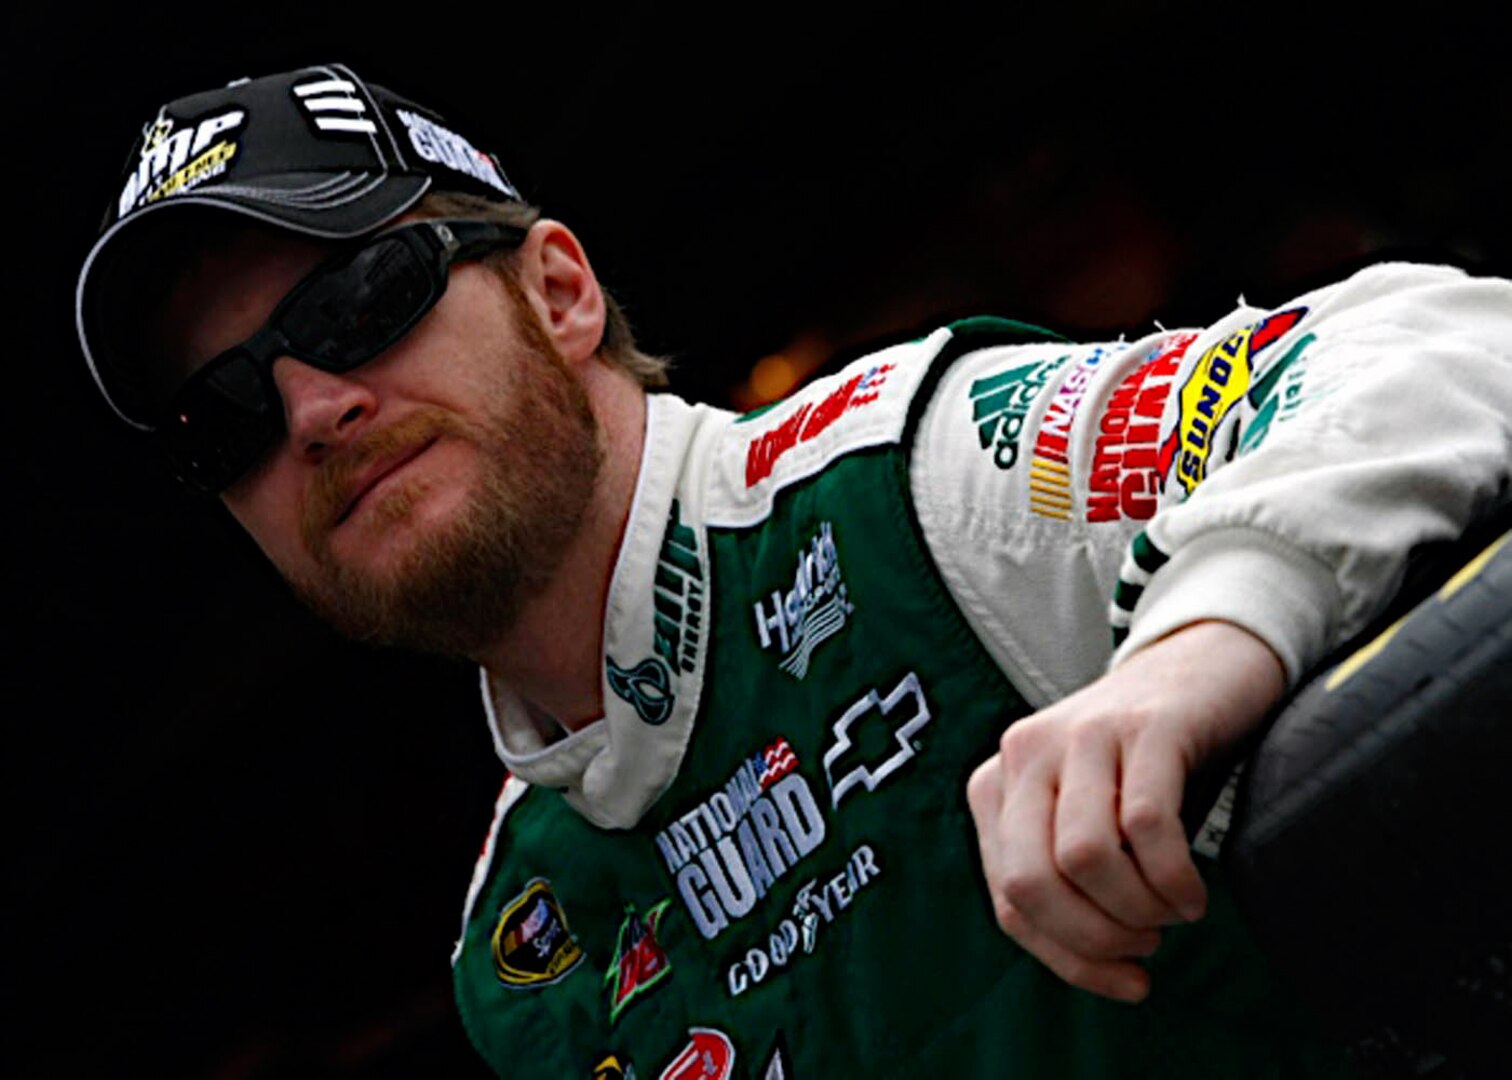 Dale Earnhardt Jr. drove the No. 88 National Guard-sponsored race car March 29 at Martinsville Speedway, Va.